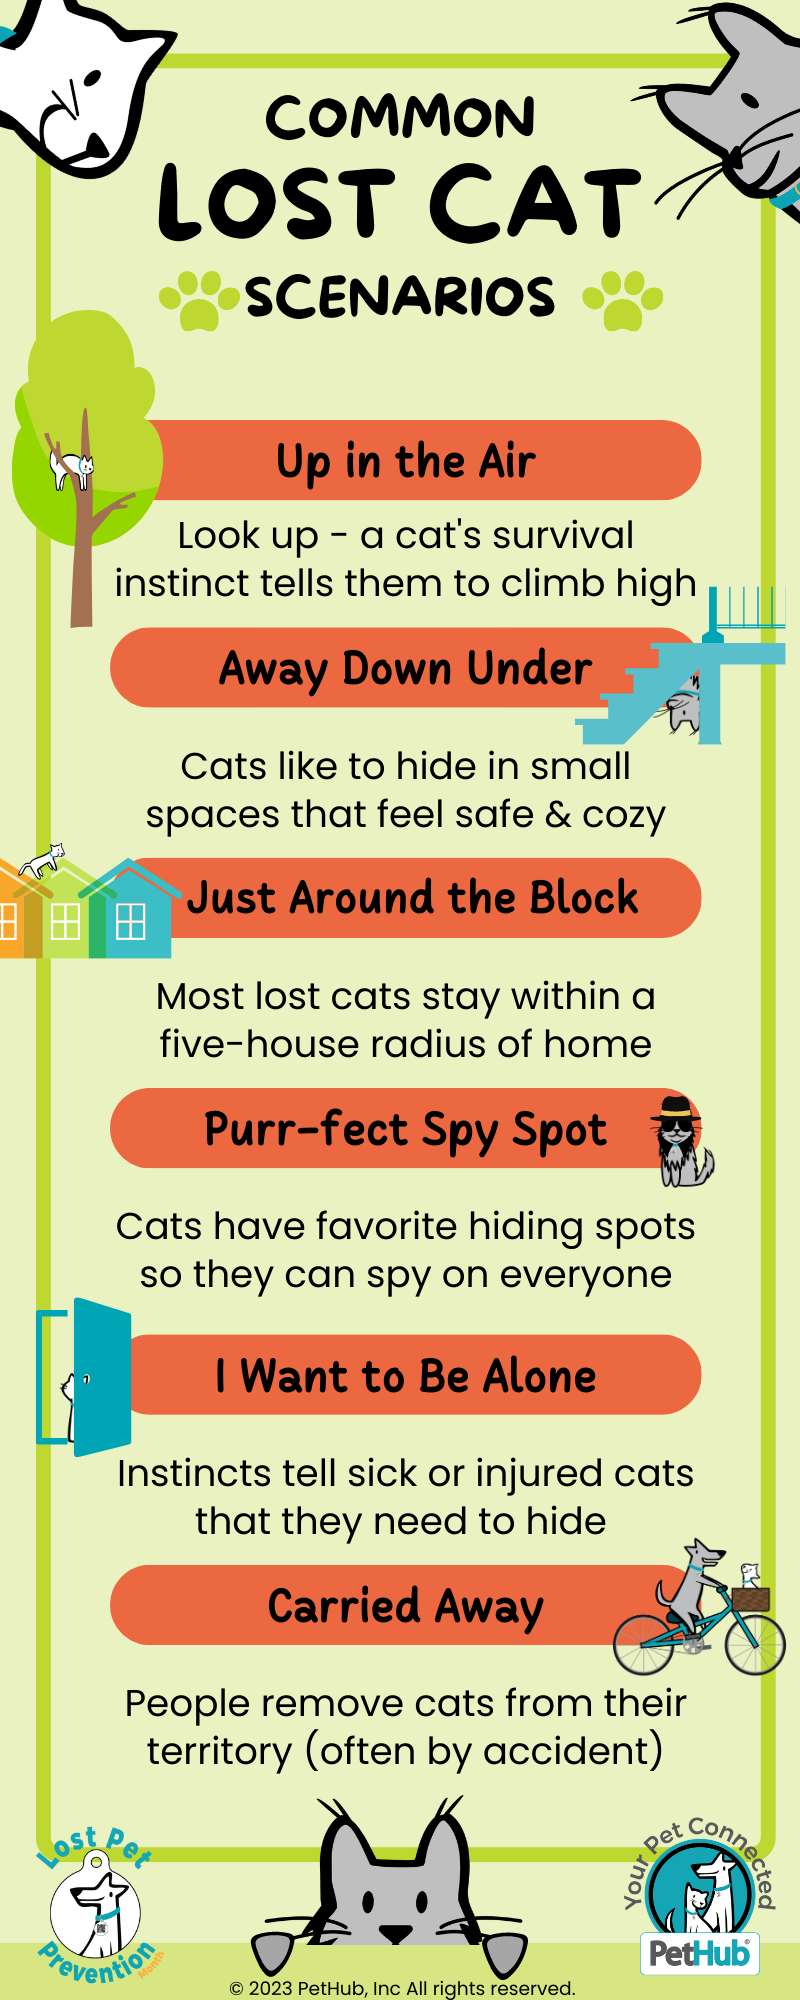 An infographic showing 6 common lost cat scenarios